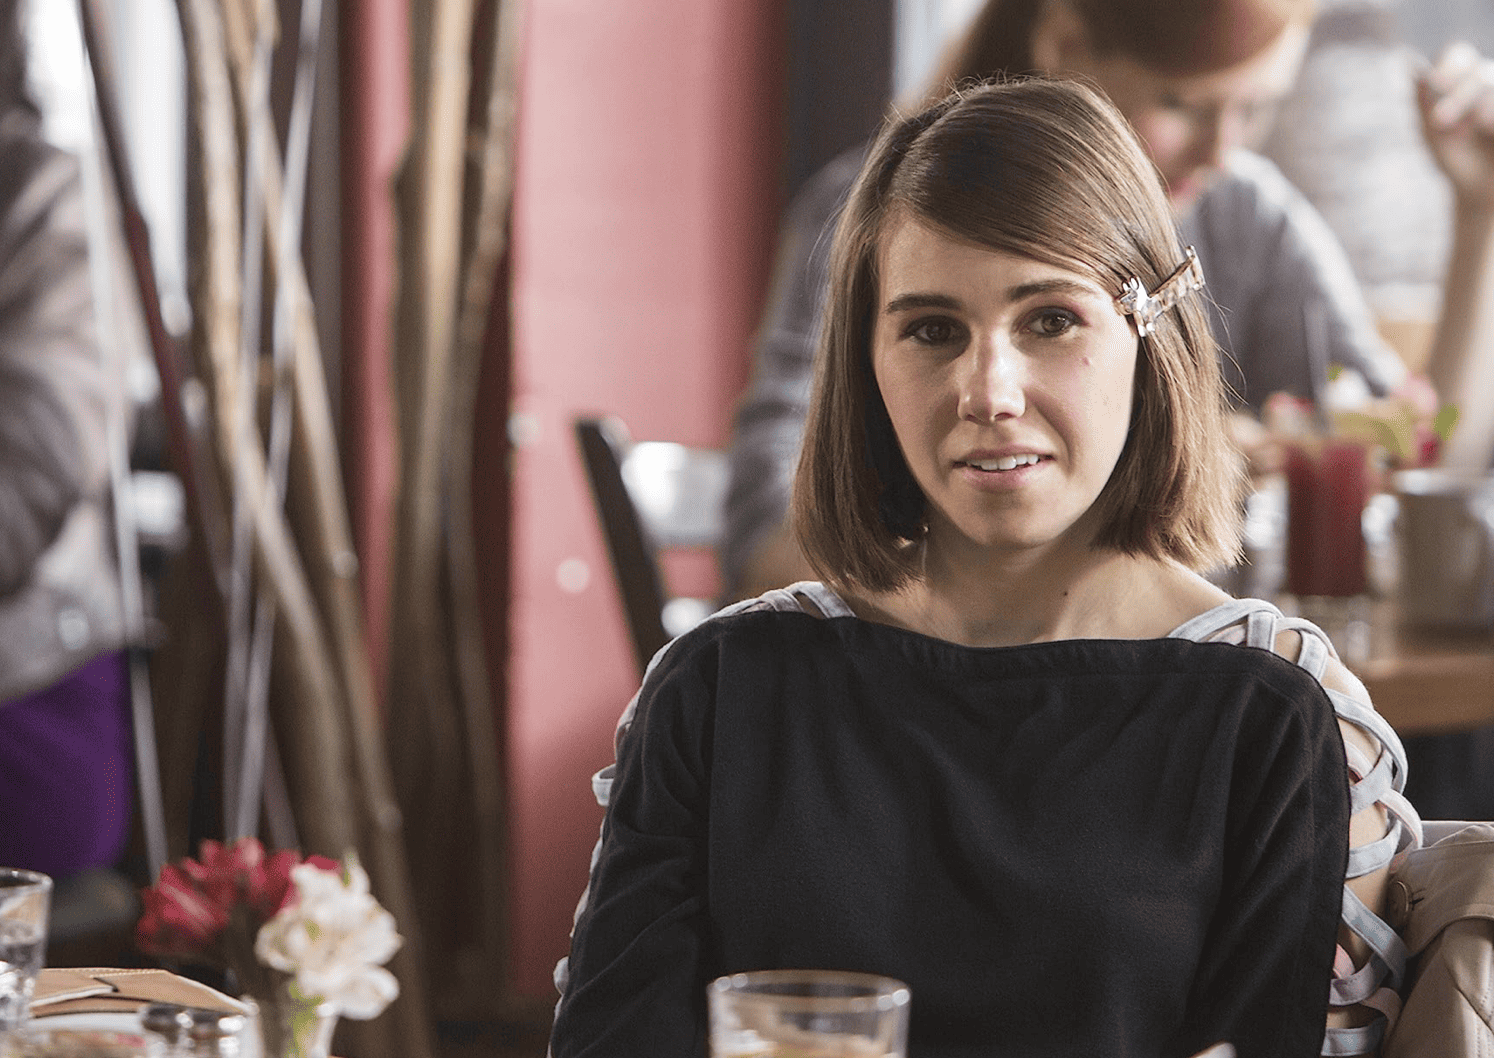 Shosh is sitting at a restaurant with a shoulder-length bob partially held by a barrette in this image from Apatow Productions.